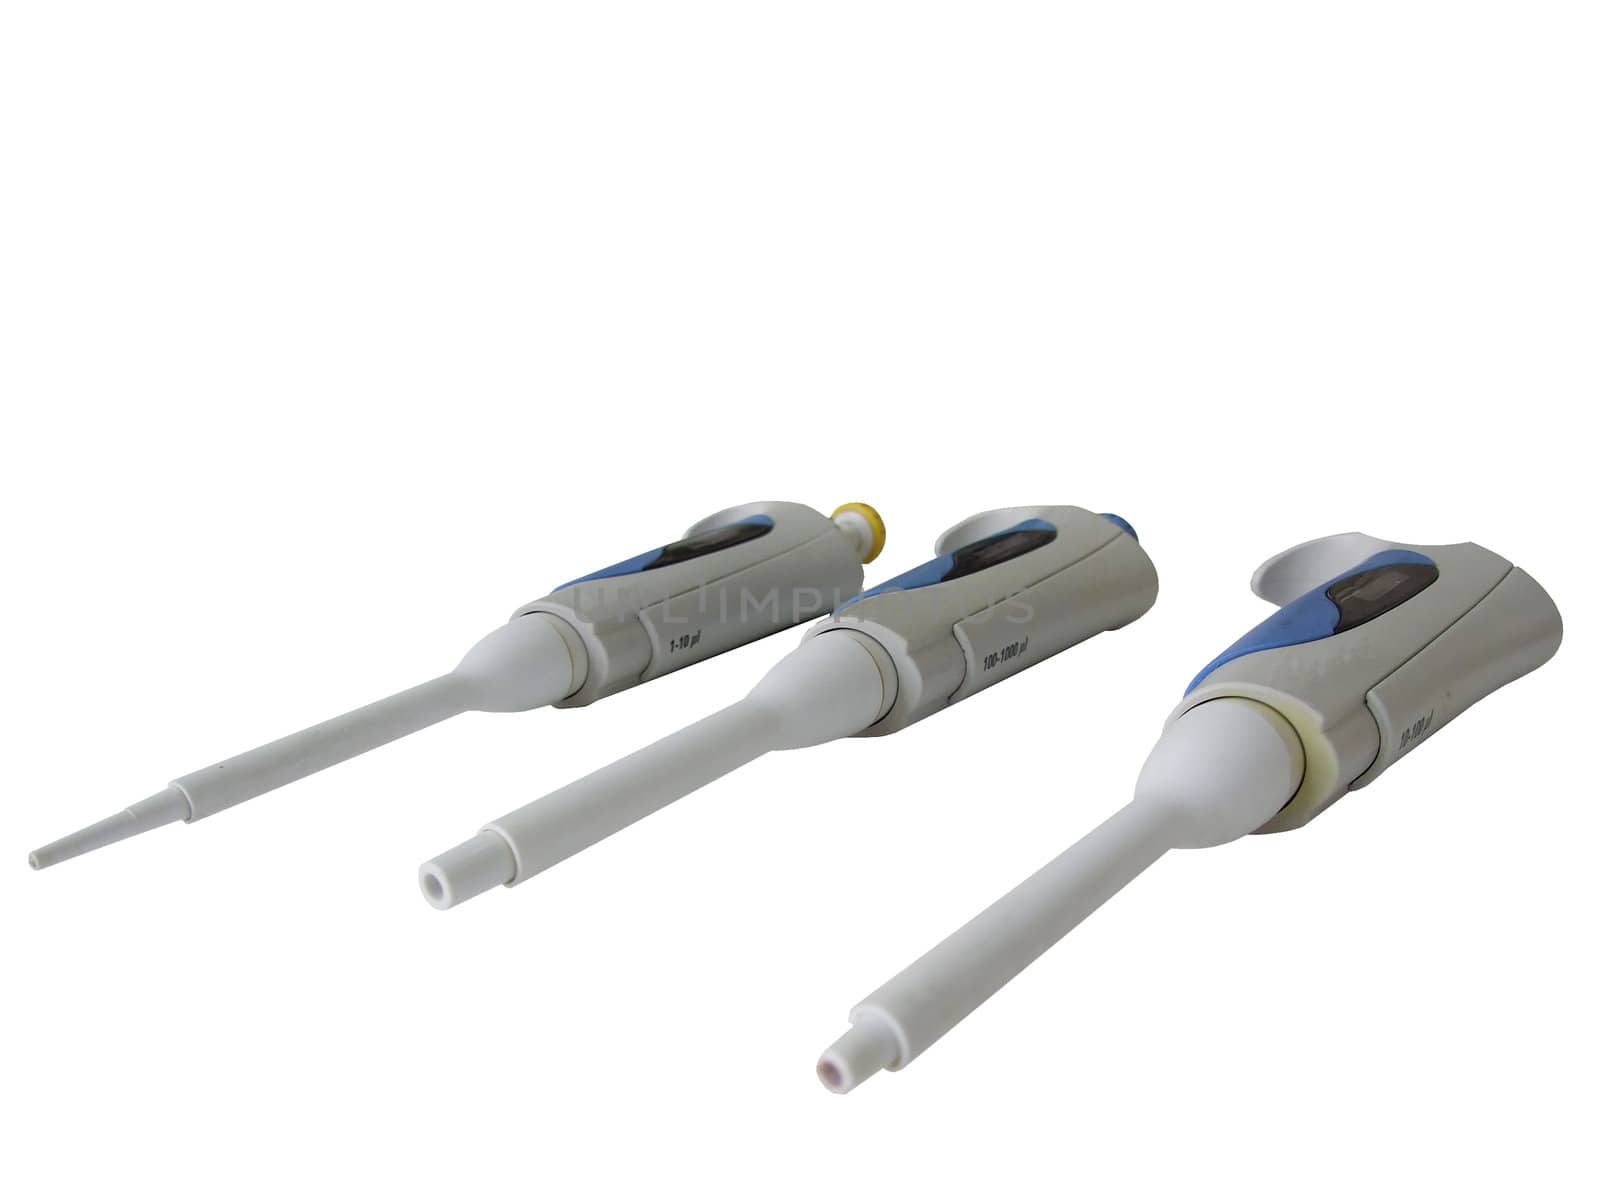 three labolatory pipettes against a white background